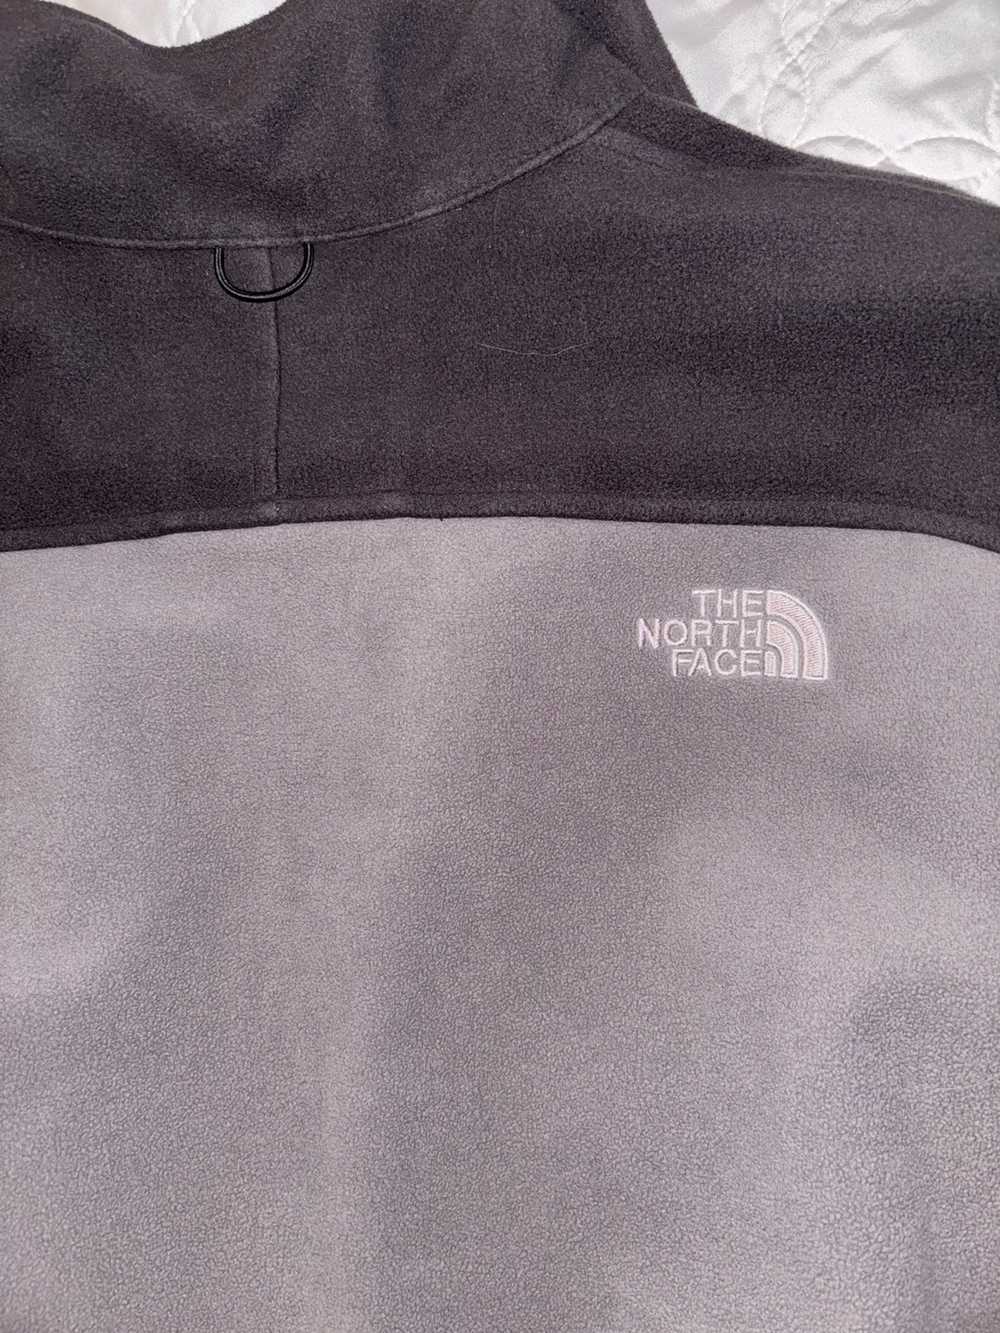 The North Face North Face Fleece - image 6